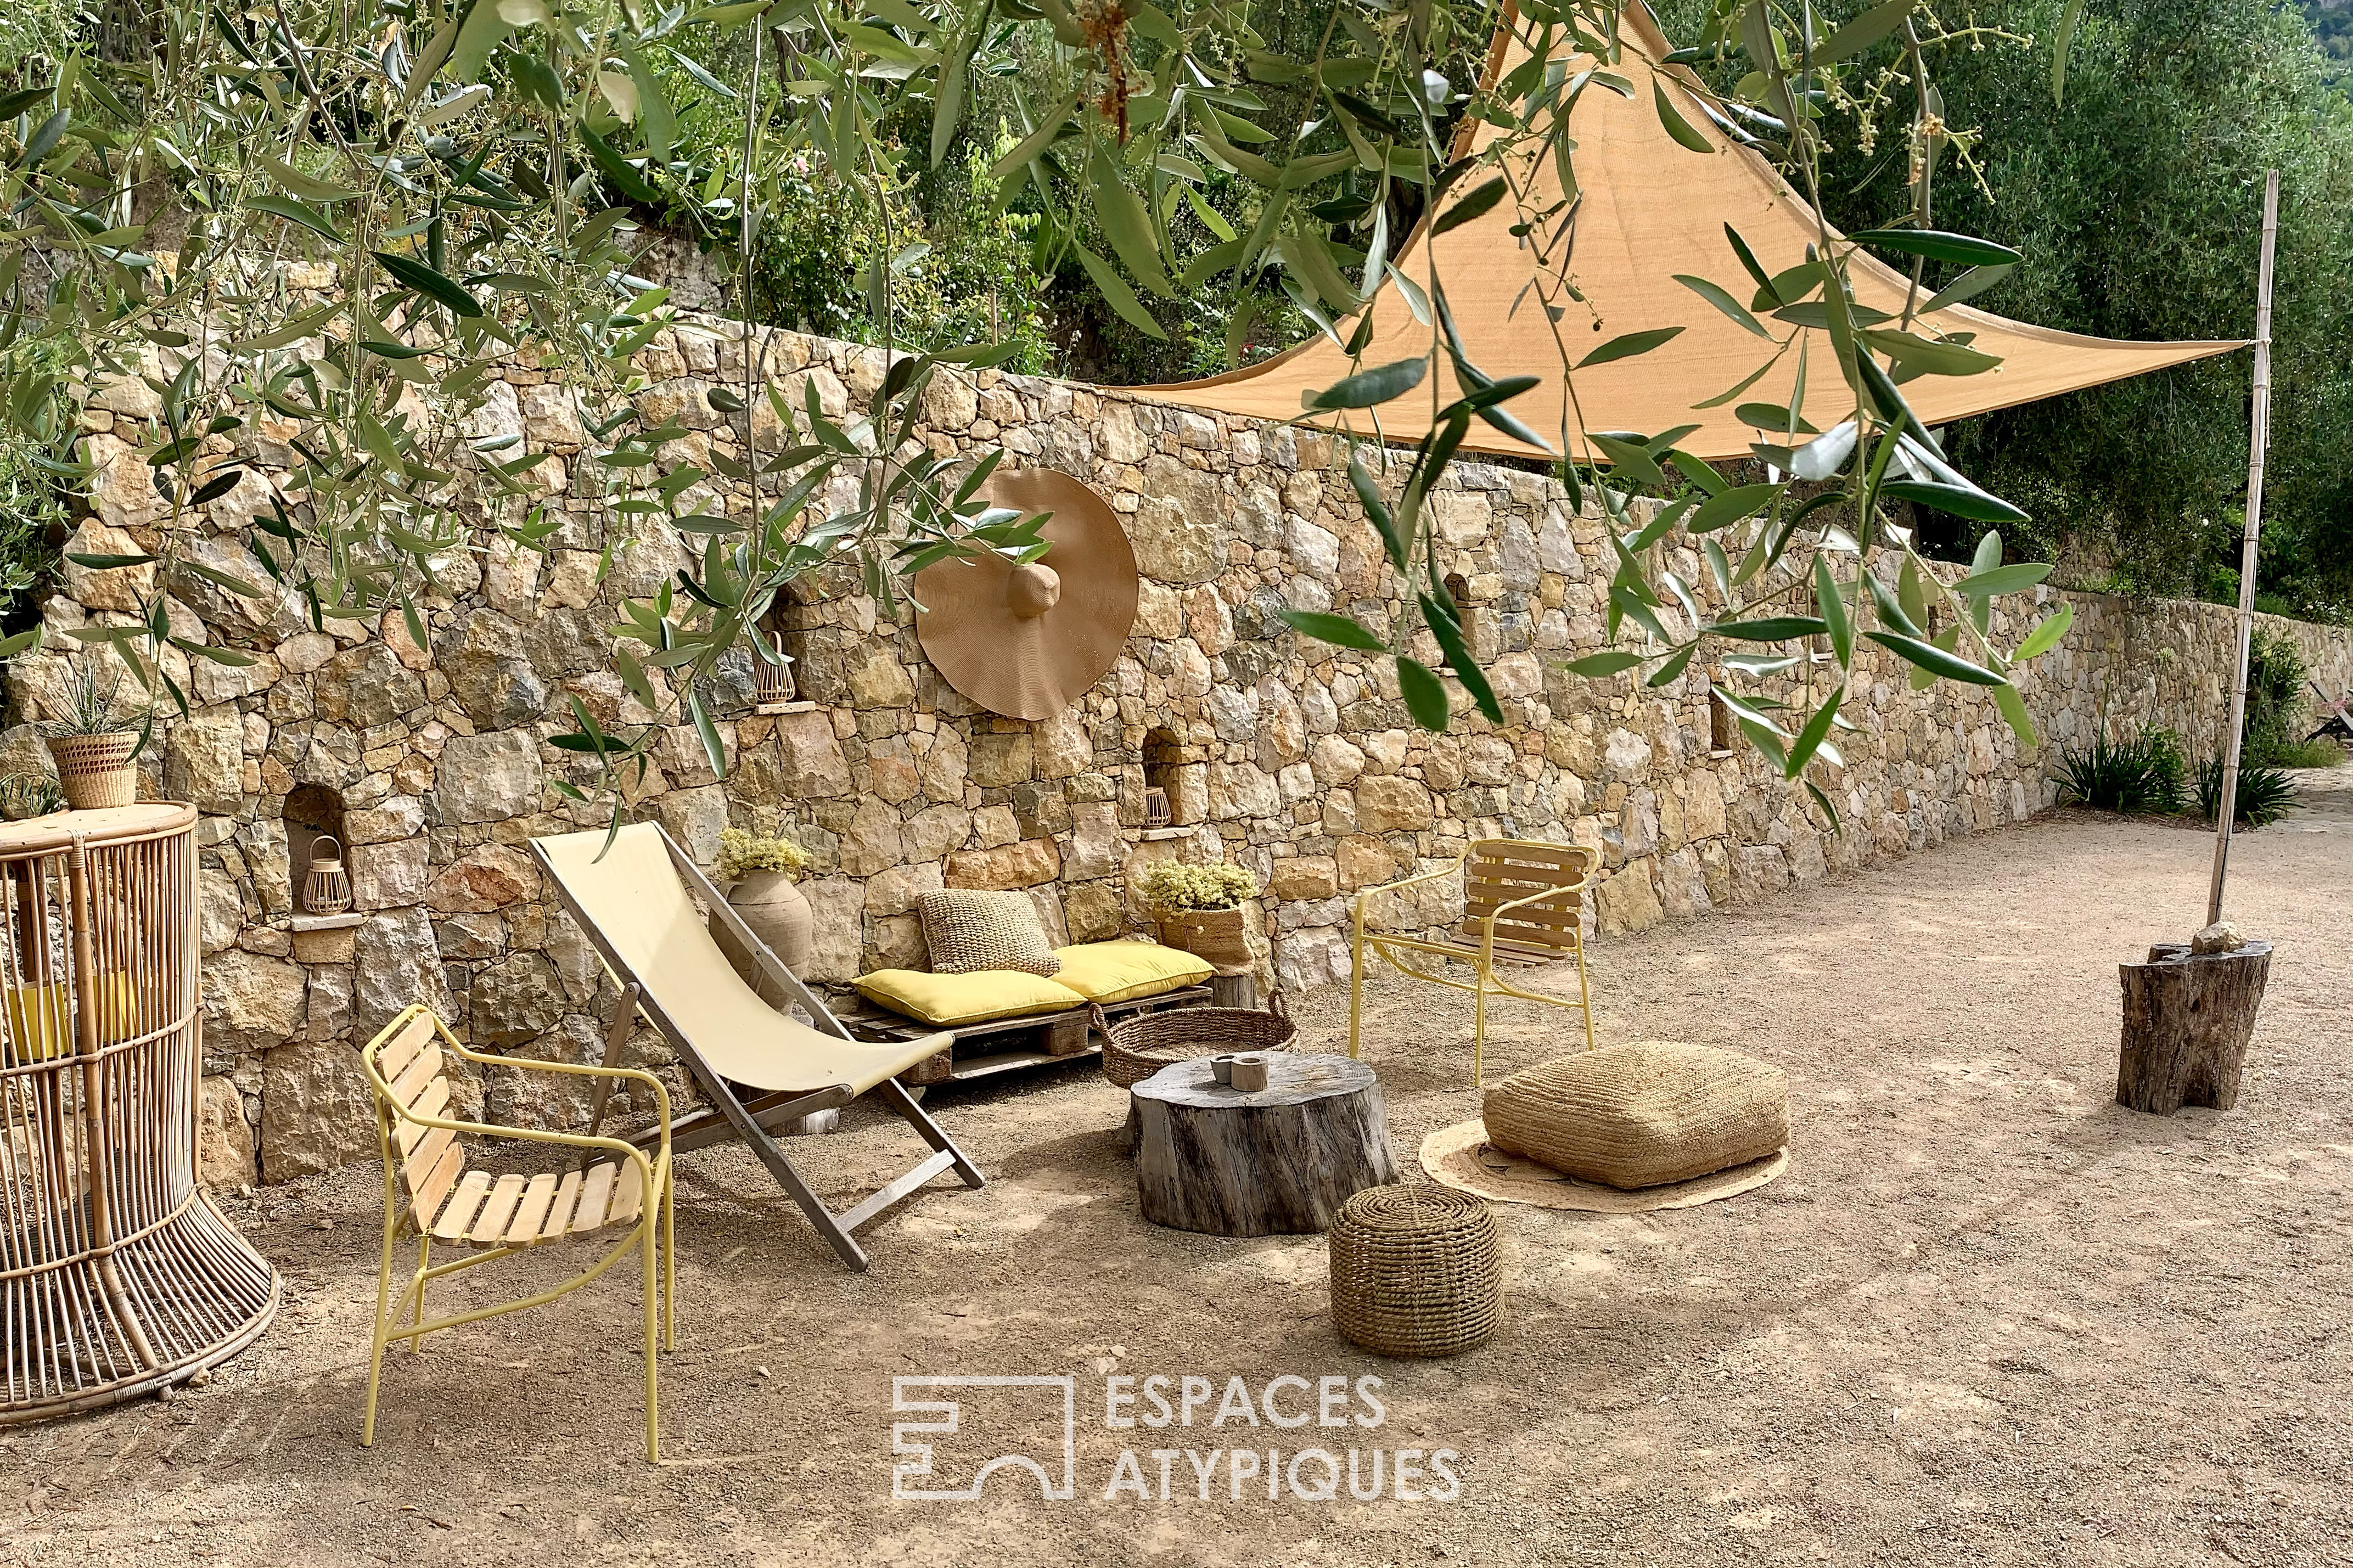 Provencal estate with stone terraces and swimming pools